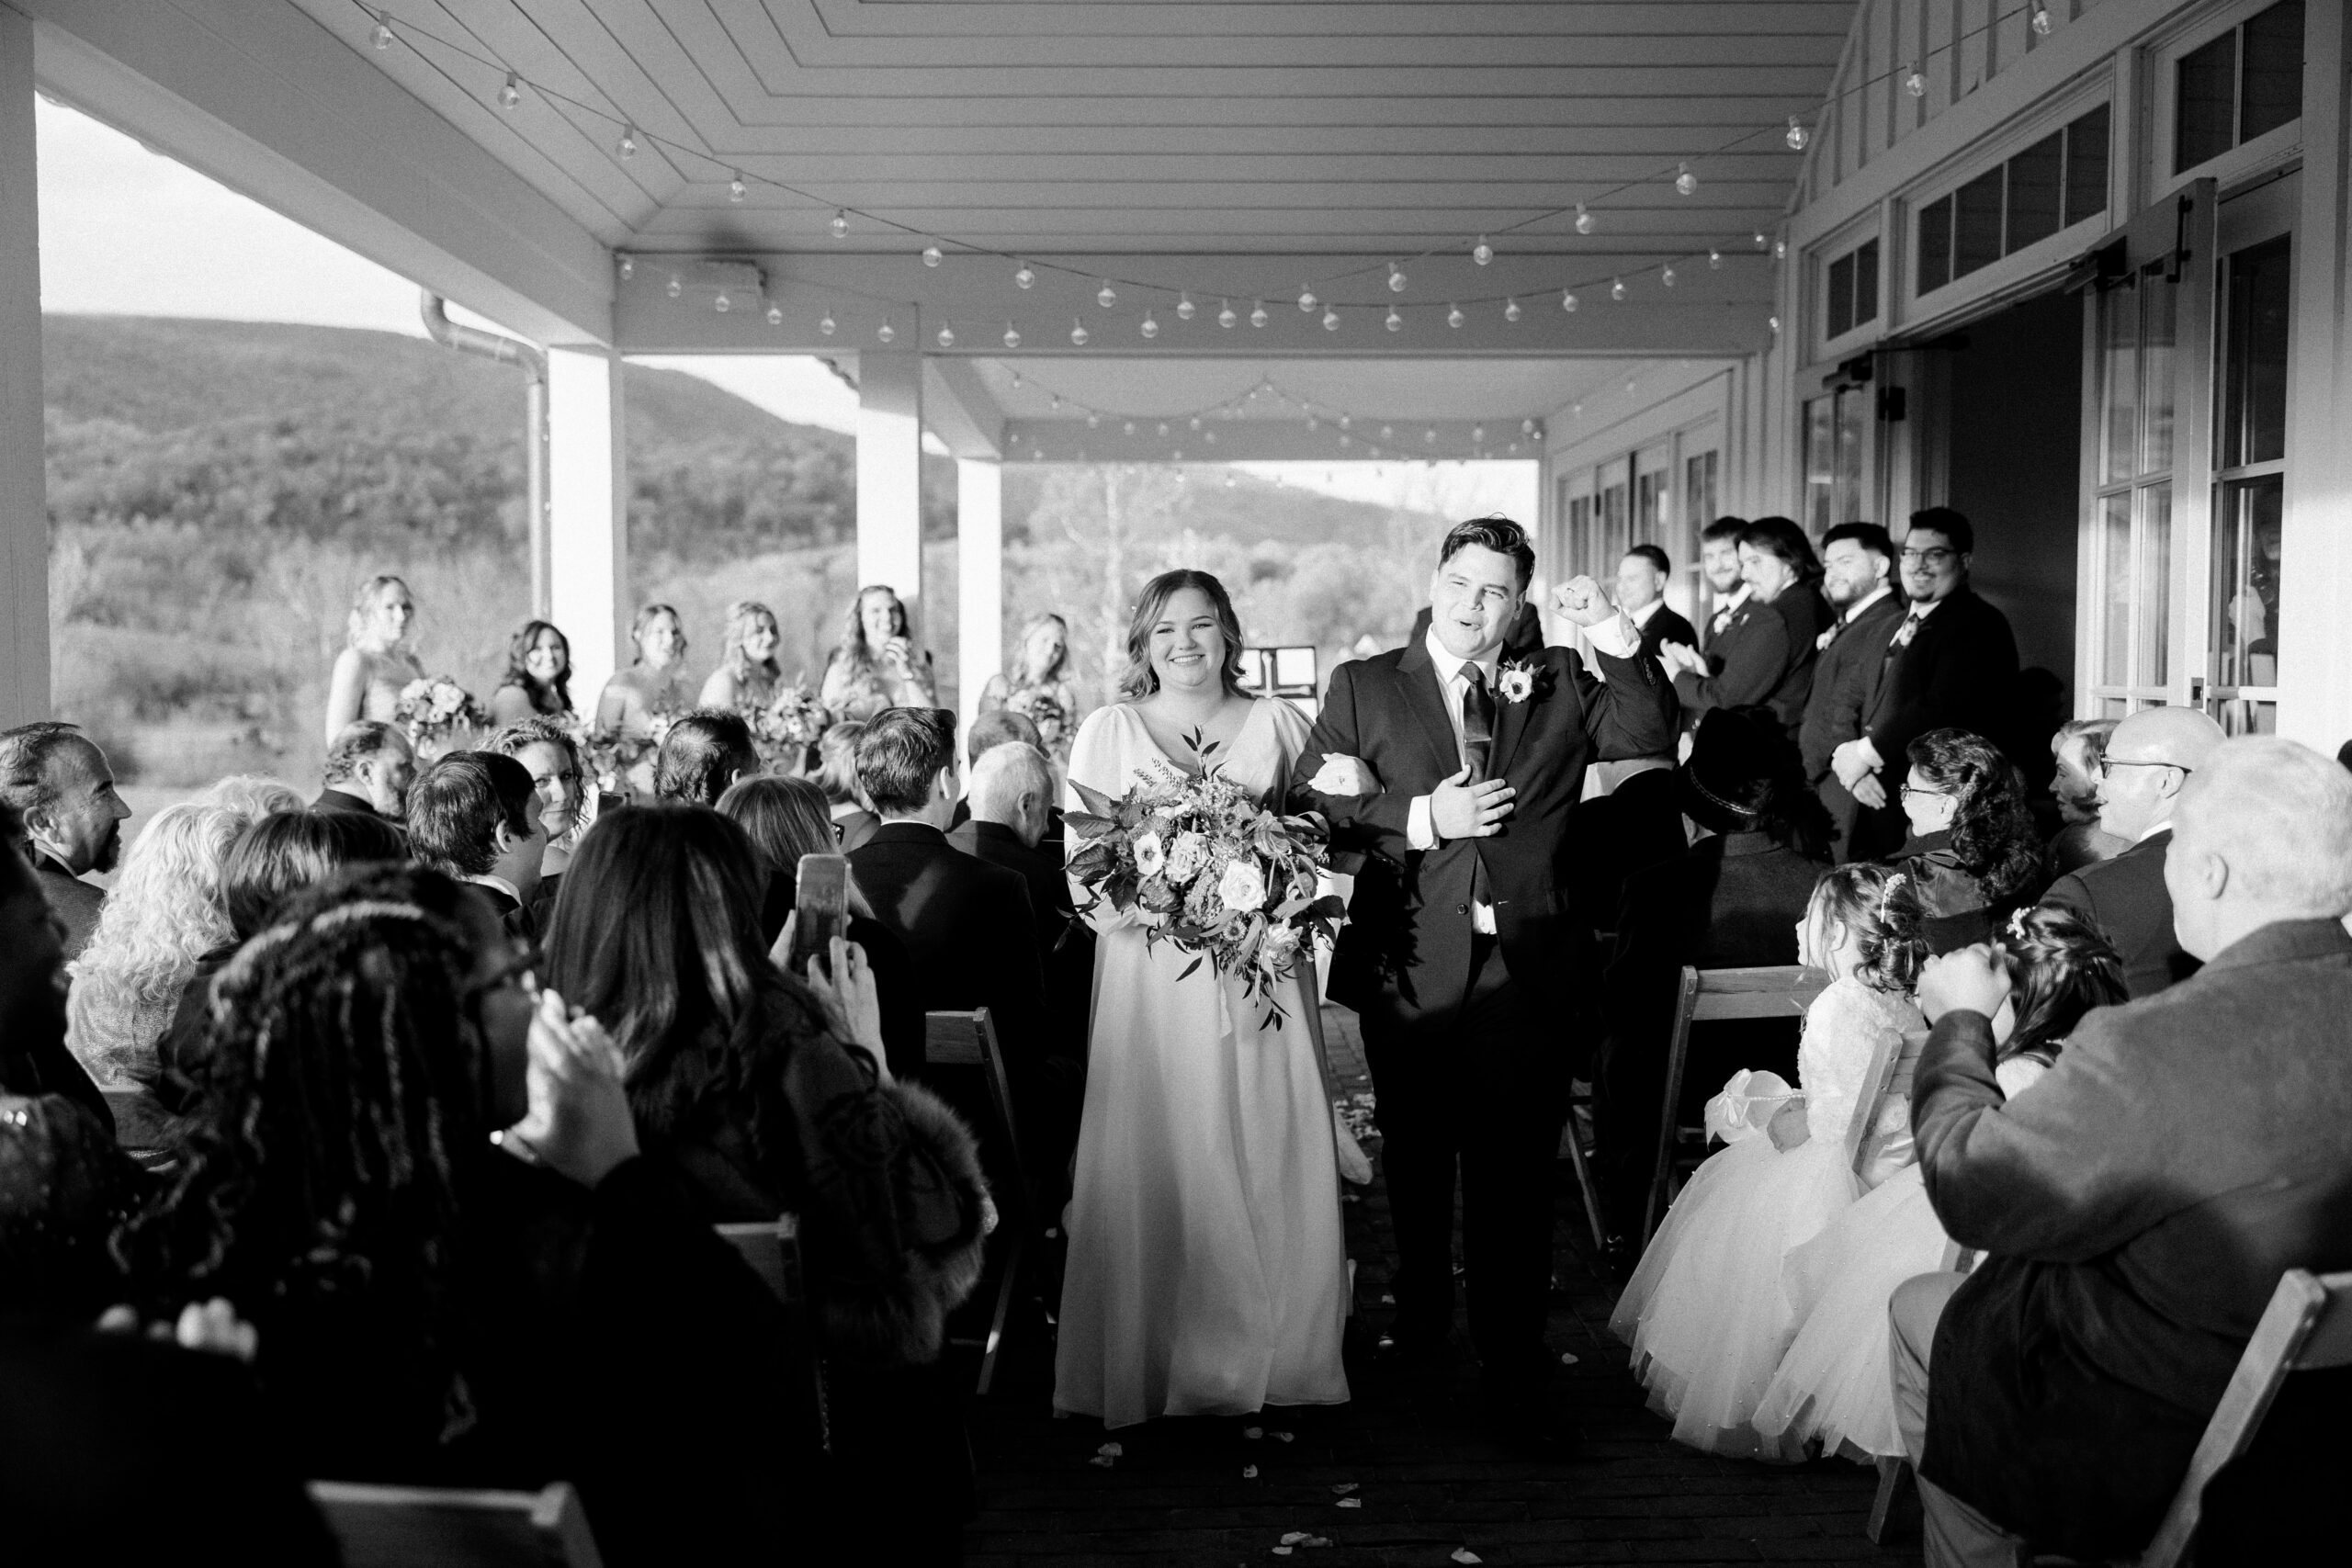 Black and white image of bride and groom happily walking back up the aisle, groom's fist in the air as they celebrate their king family vinyeards fall wedding